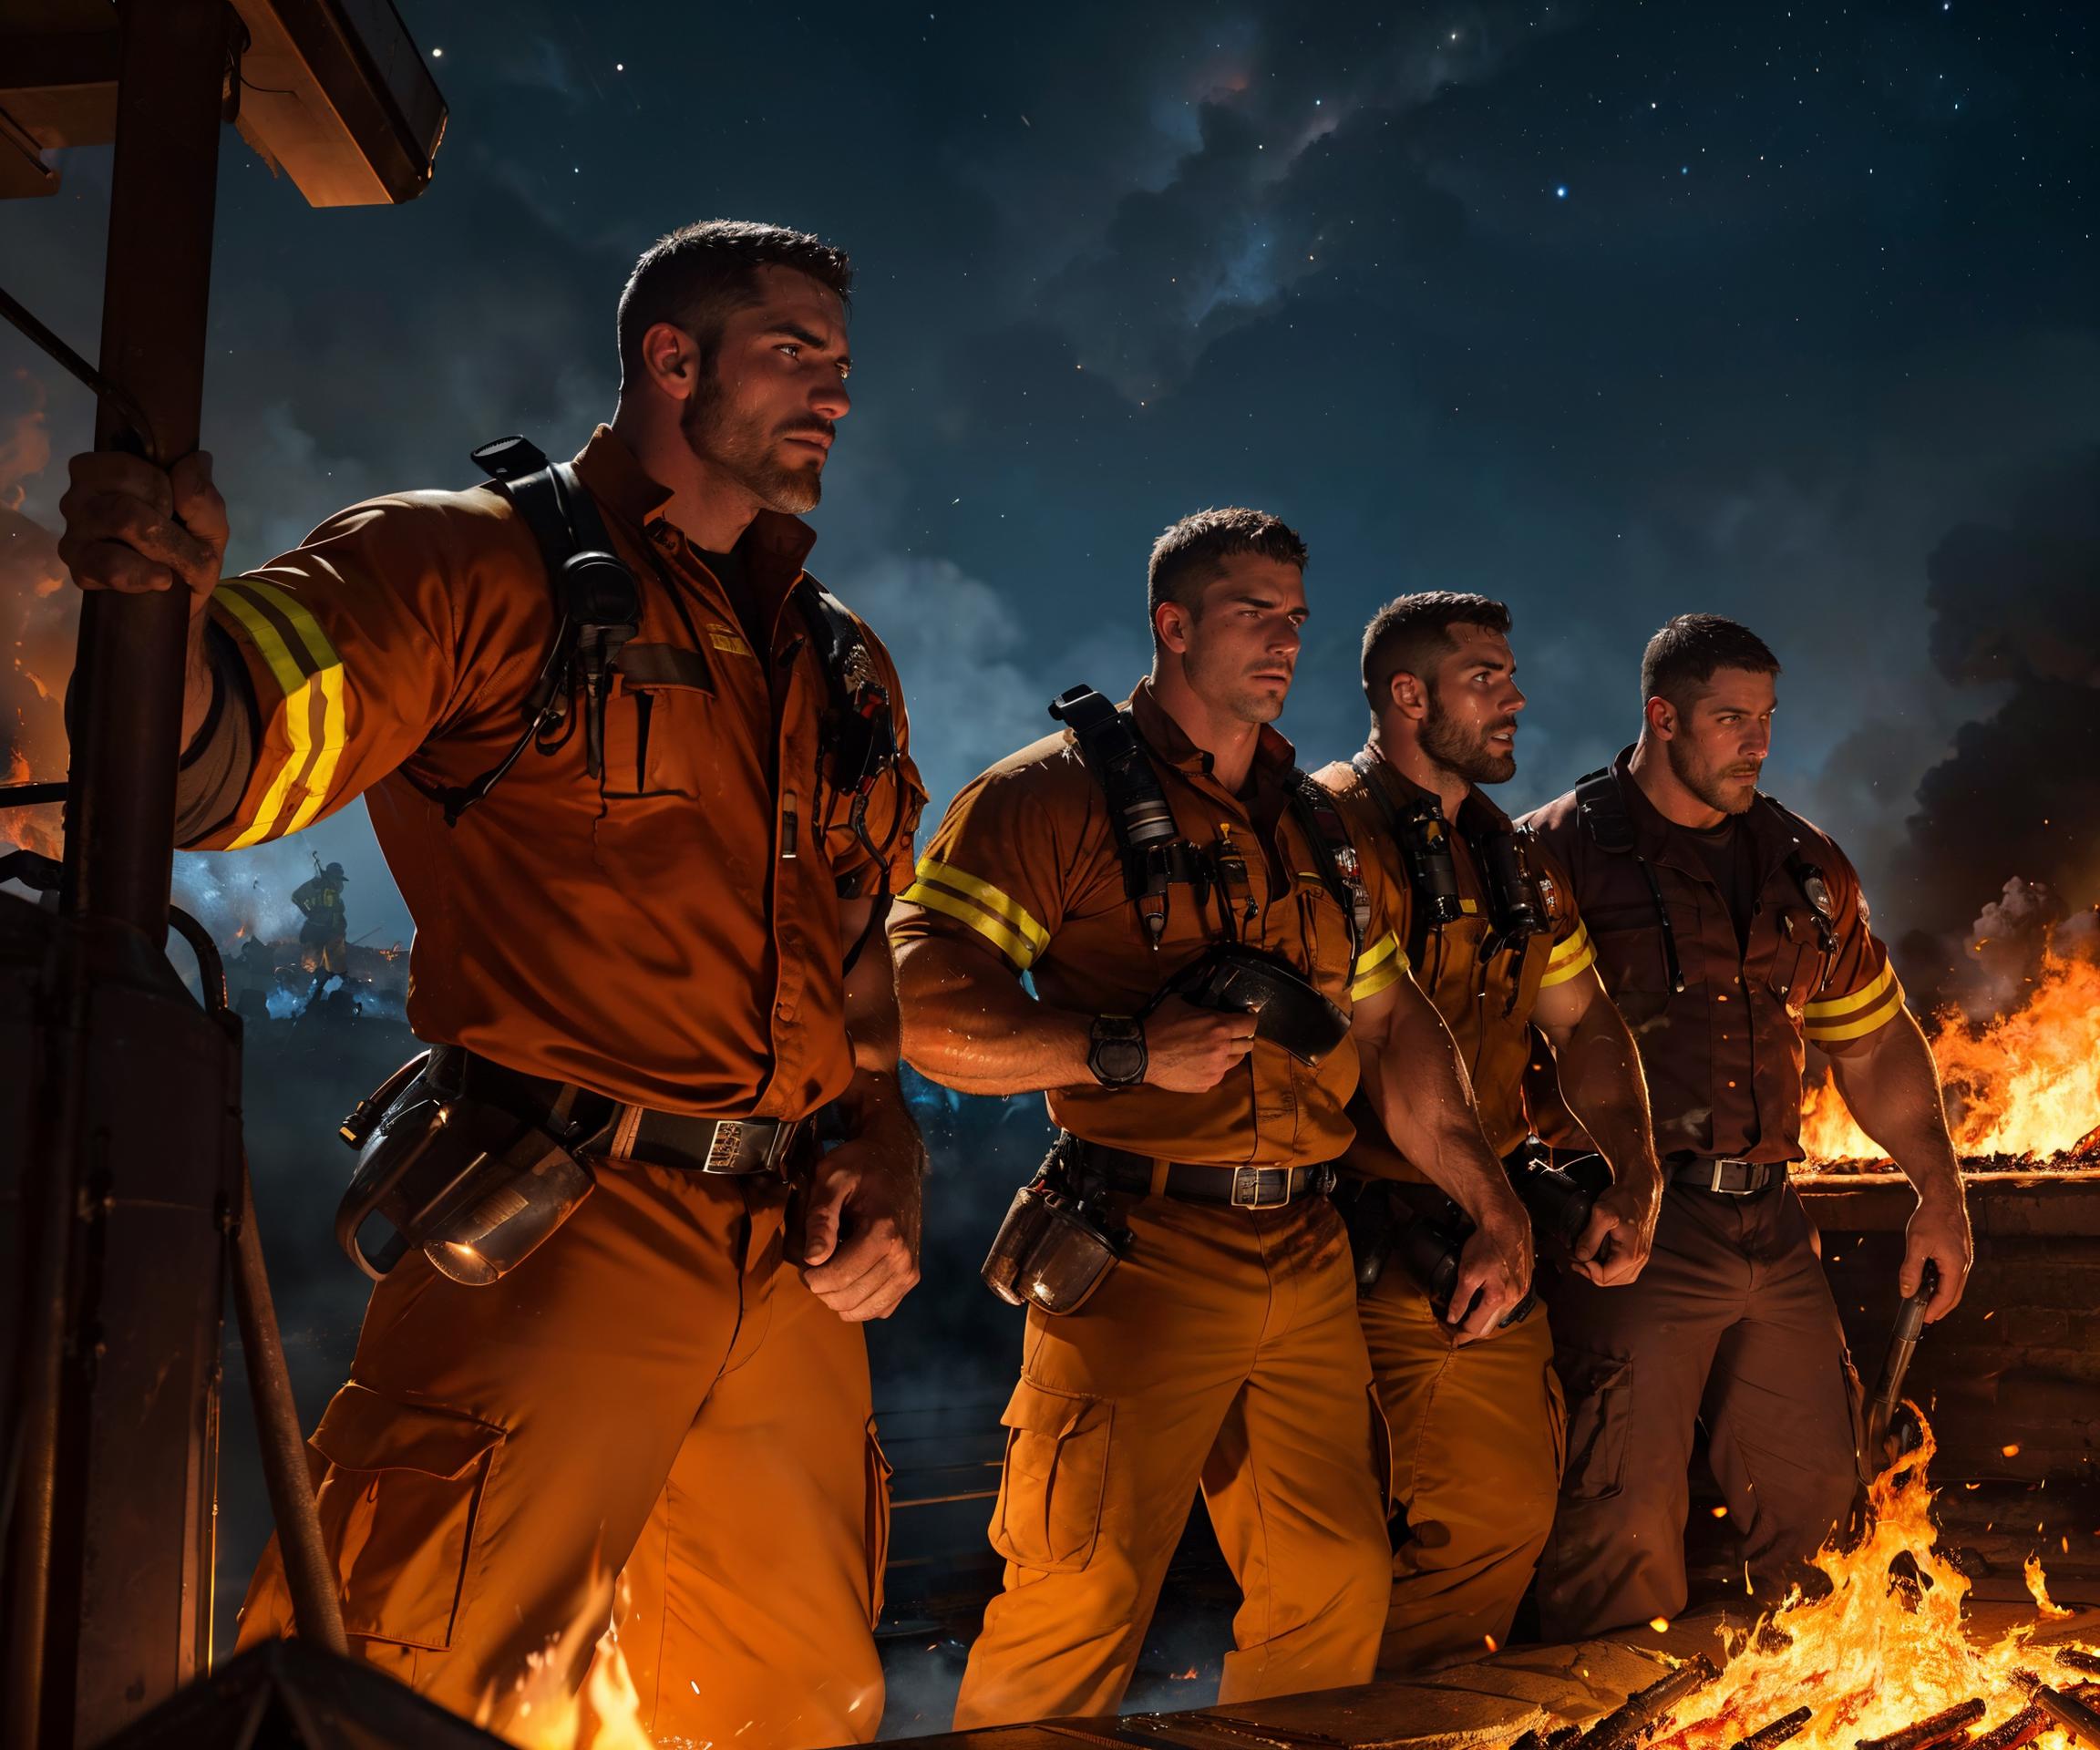 Four Men in Firefighter Uniforms Standing Together